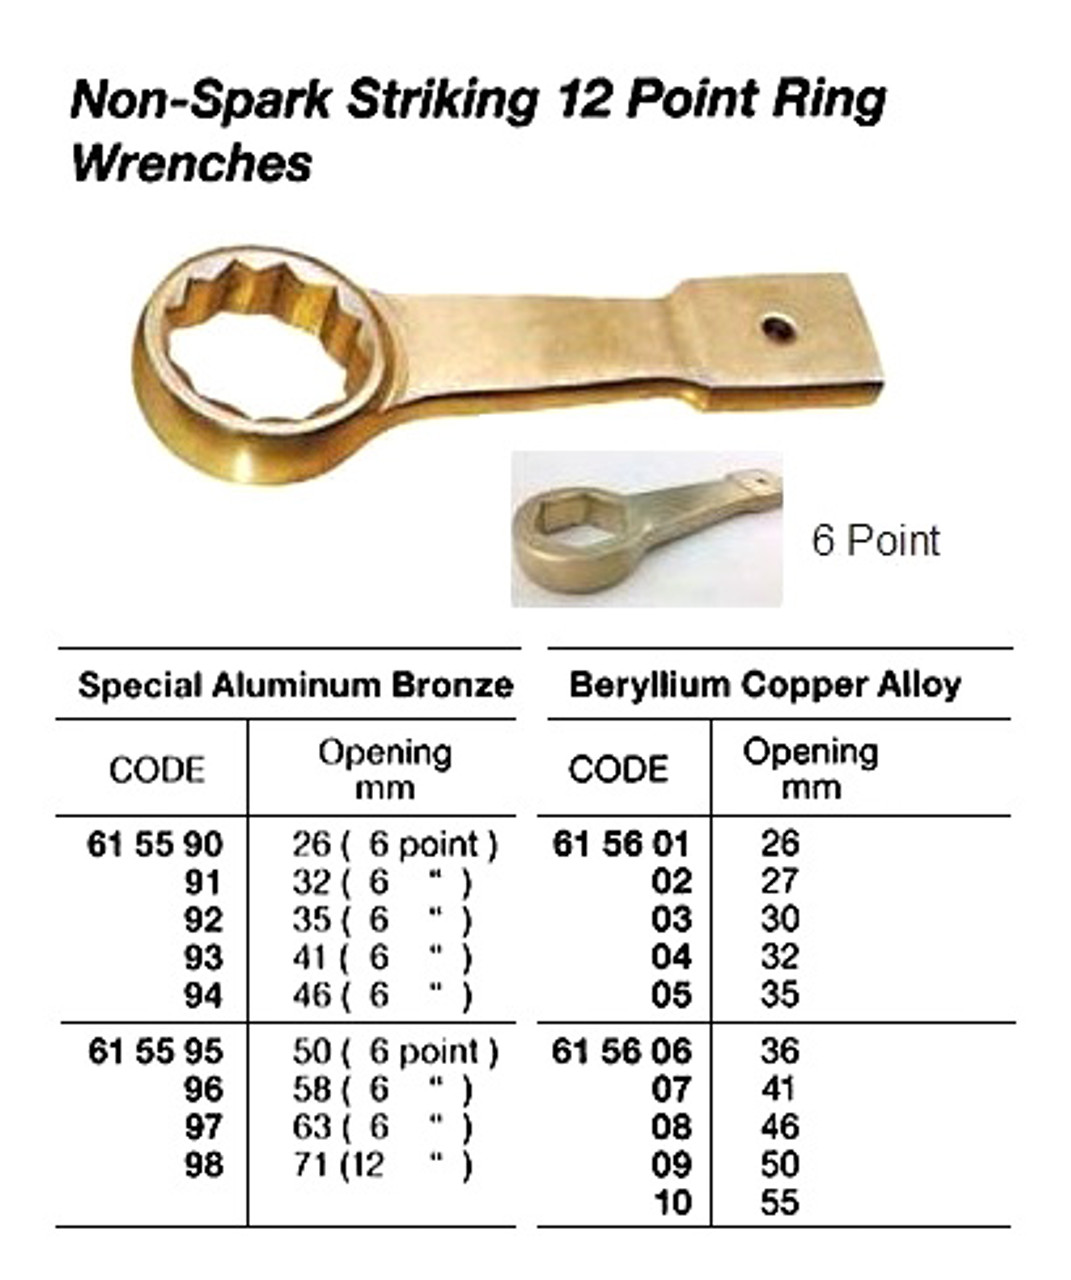 IMPA 615596 WRENCH STRIKING RING 6-POINT NON-SPARK MBK 58MM